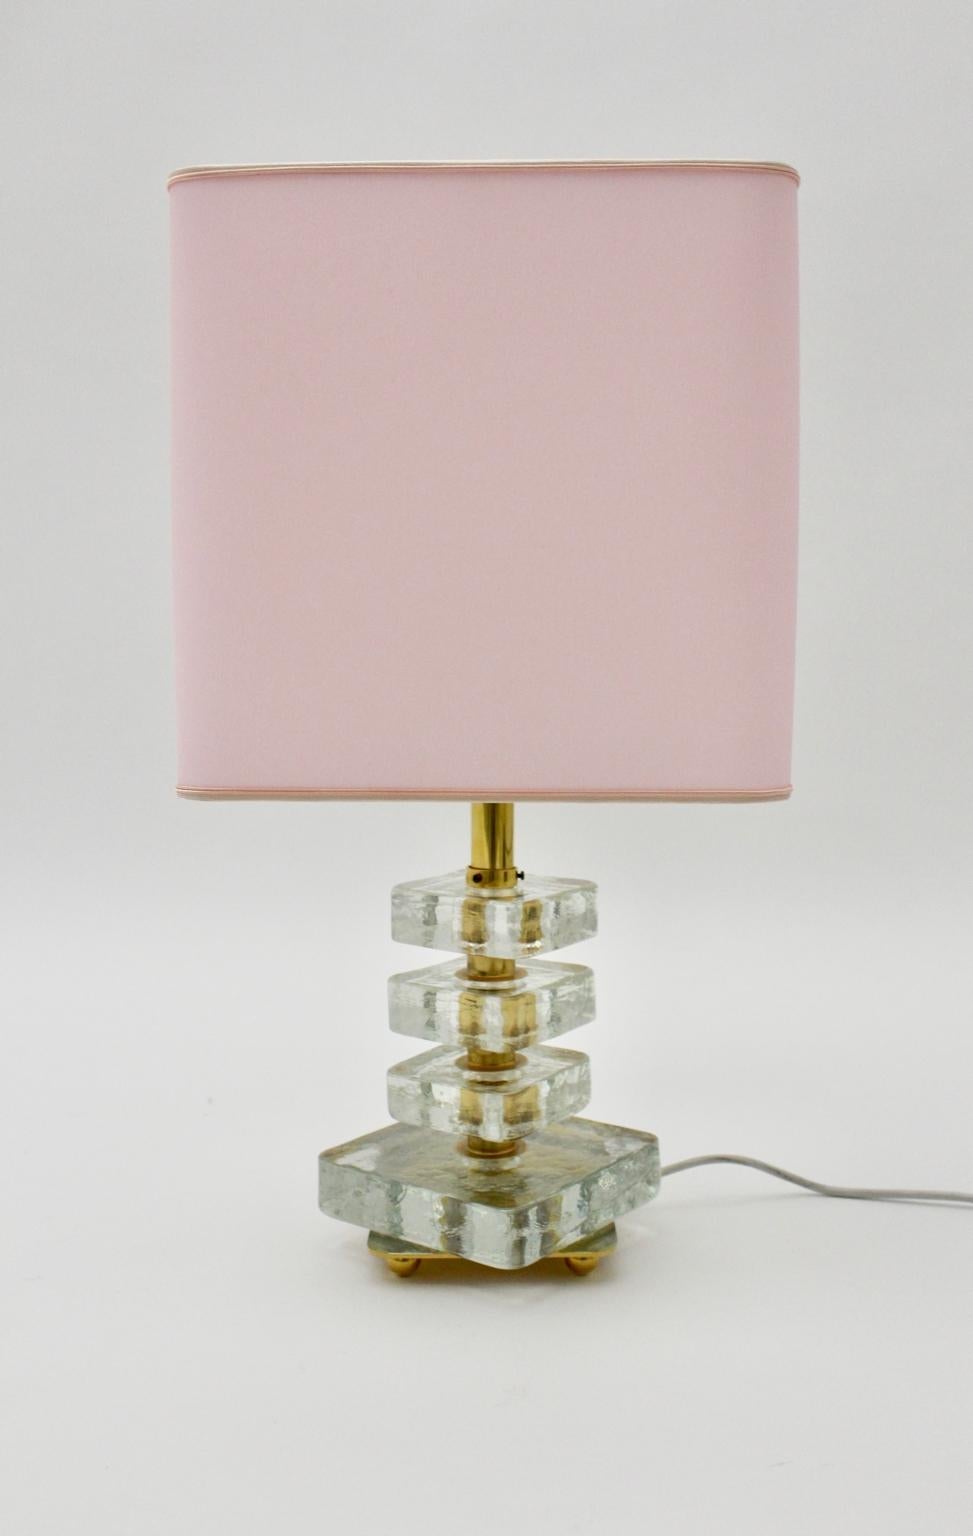 Very elegant and best quality table lamp by Bakalowits & Söhne, Vienna, 1960s.
This table lamp was made of gilded brass and four frosted glass square elements which are swiveling.
Also the golden base shows four golden balls.
This table lamp is in